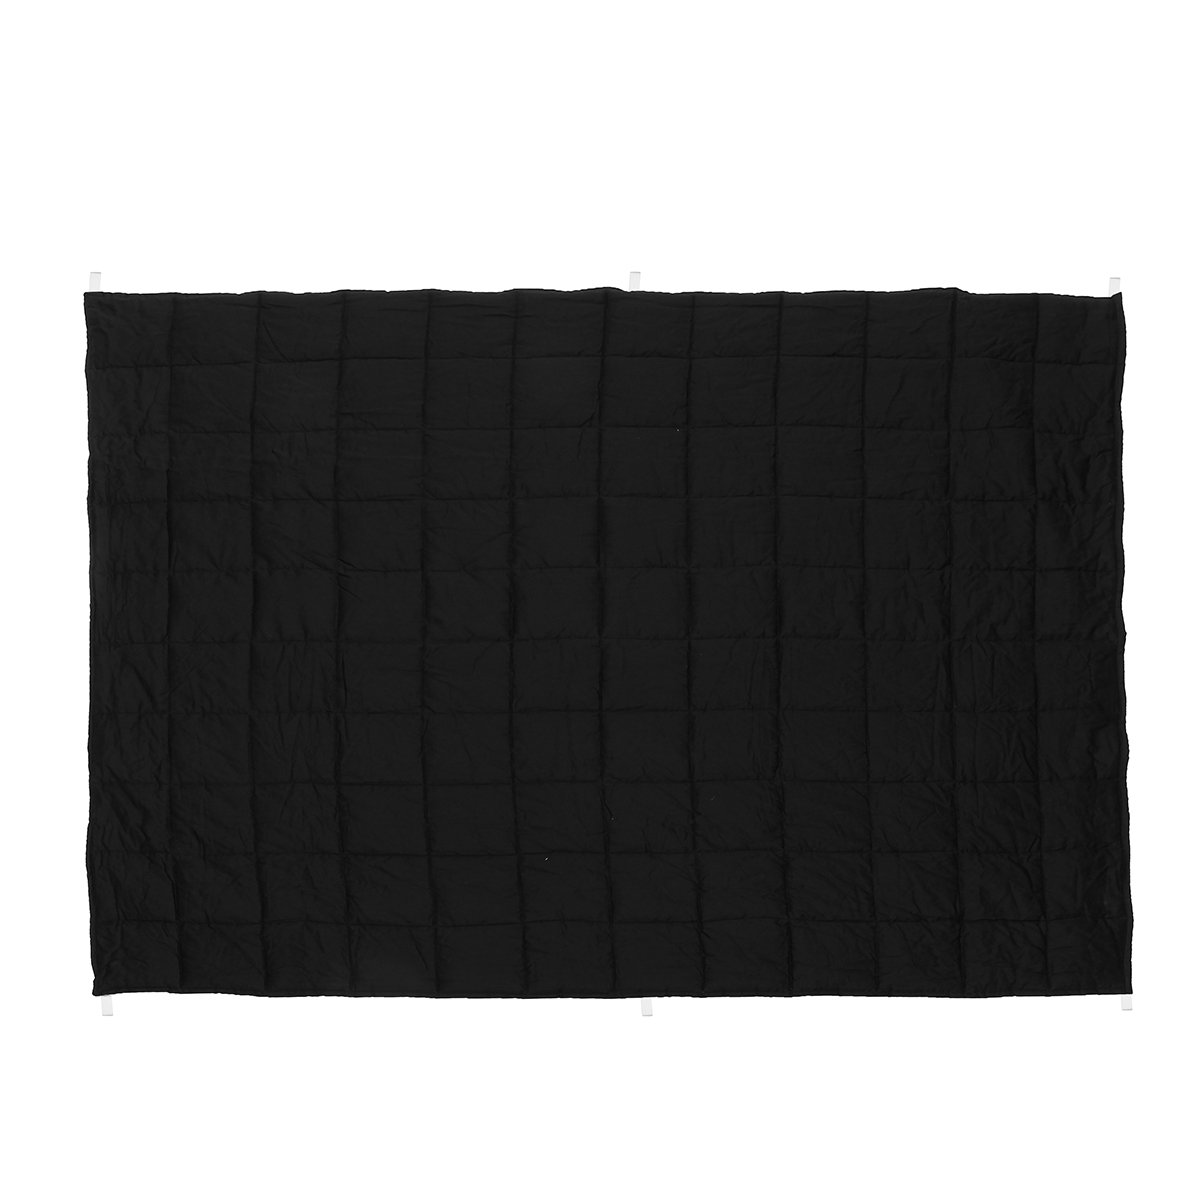 120x180CM-Black-Grey-Weighted-Blanket-Cotton-79115kg-Heavy-Sensory-Relax-Blankets-1349466-4